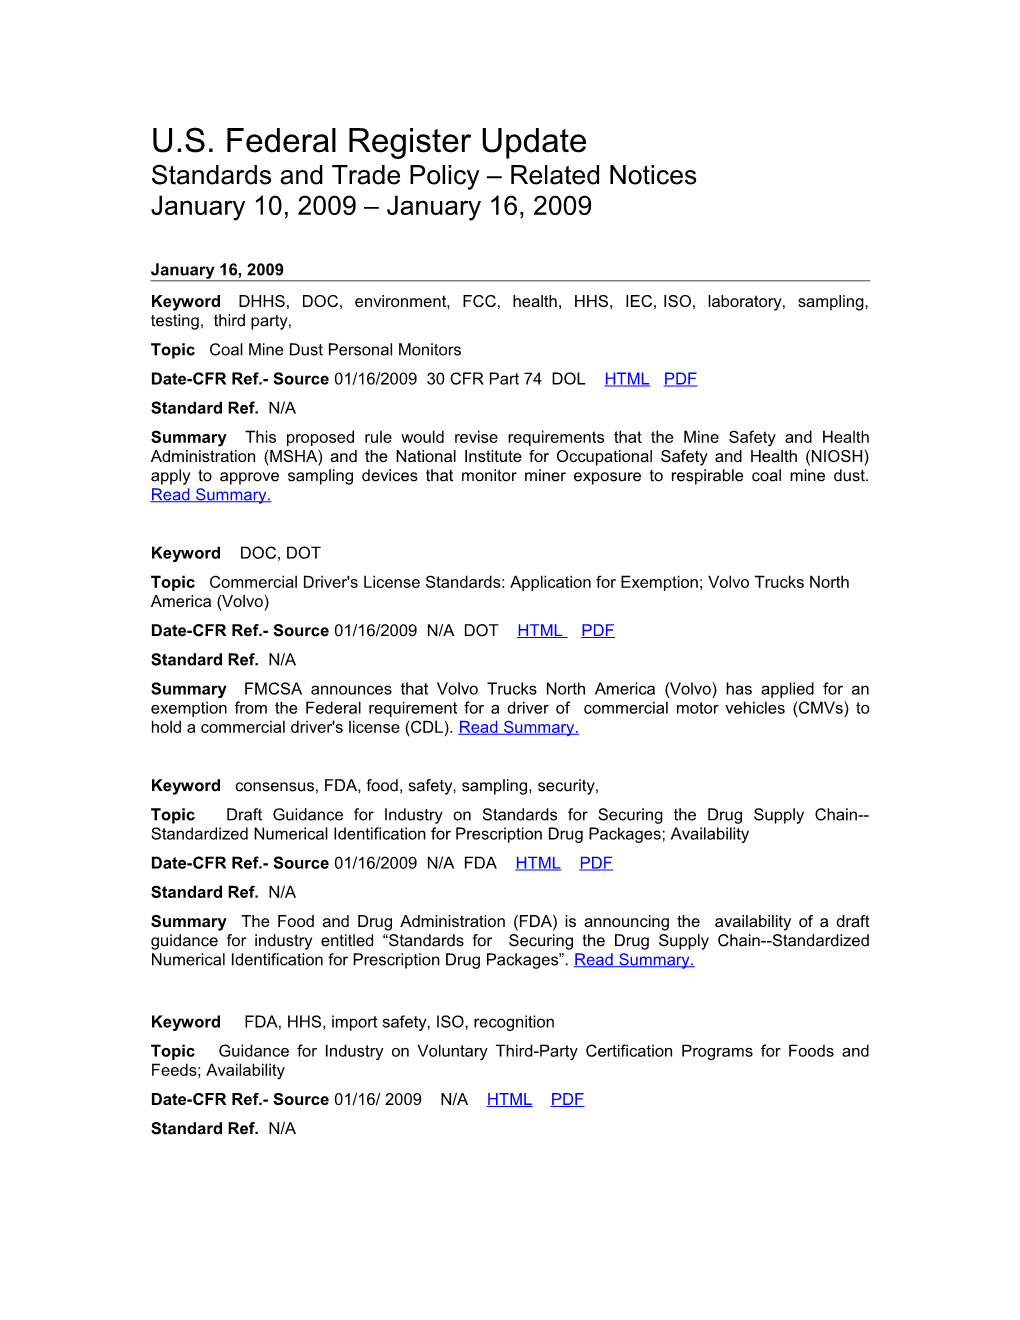 Standards and Trade Related Notices from the U.S. Federal Register, 1.16.09